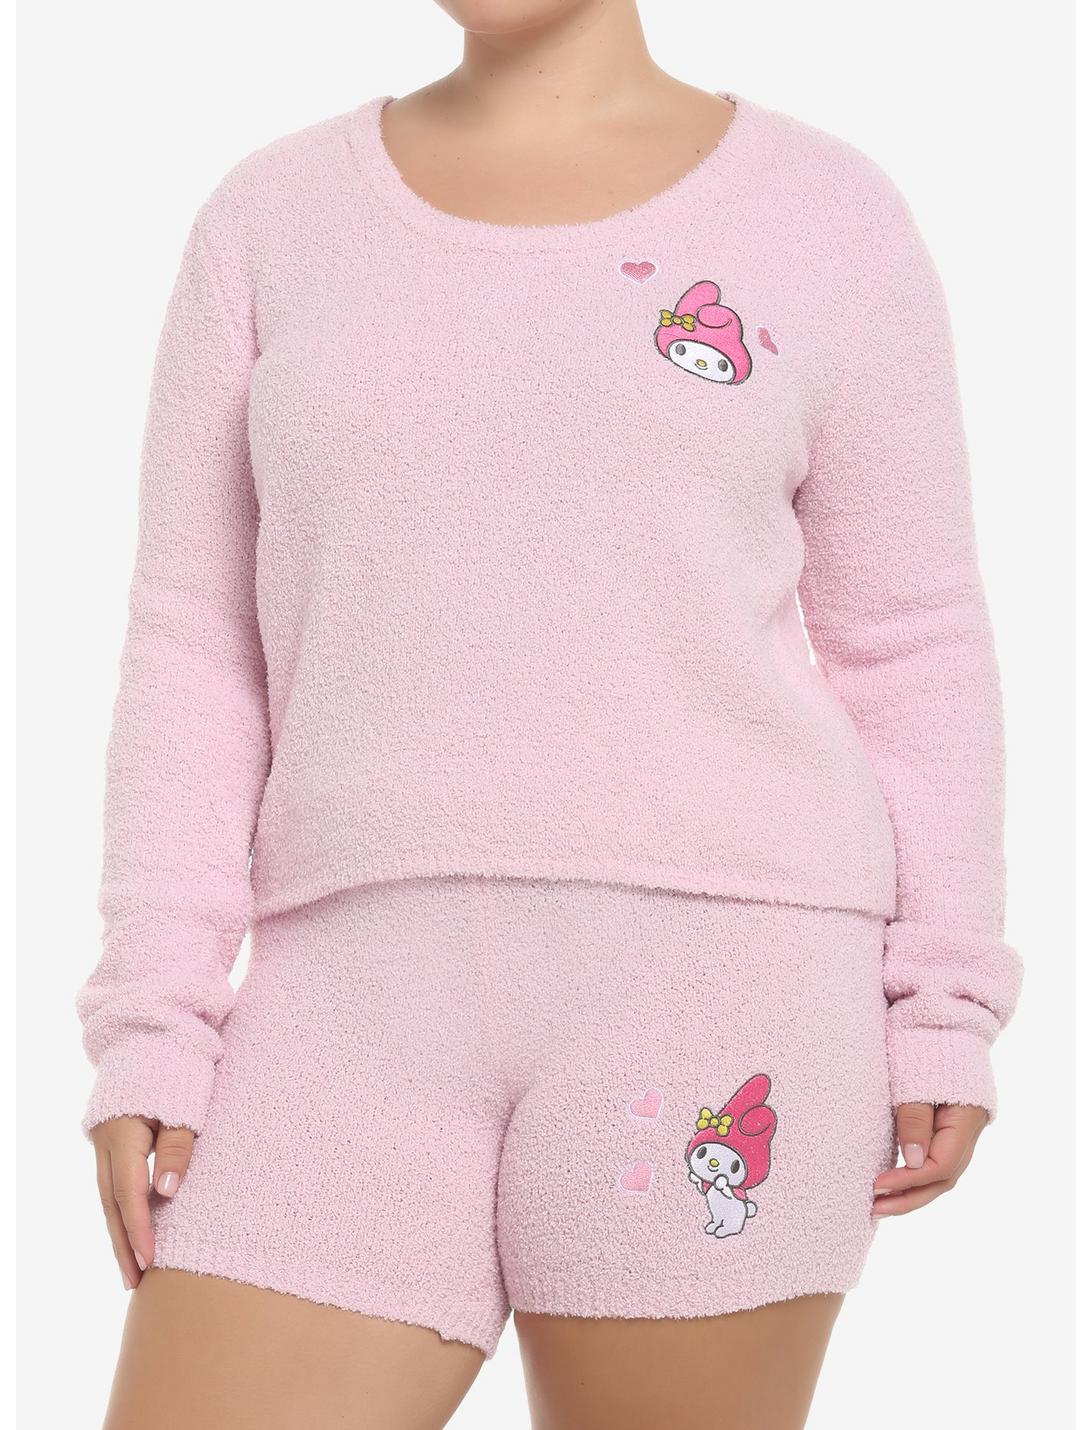 My Melody Hearts Girls Lounge Set Plus Size, PINK, hi-res